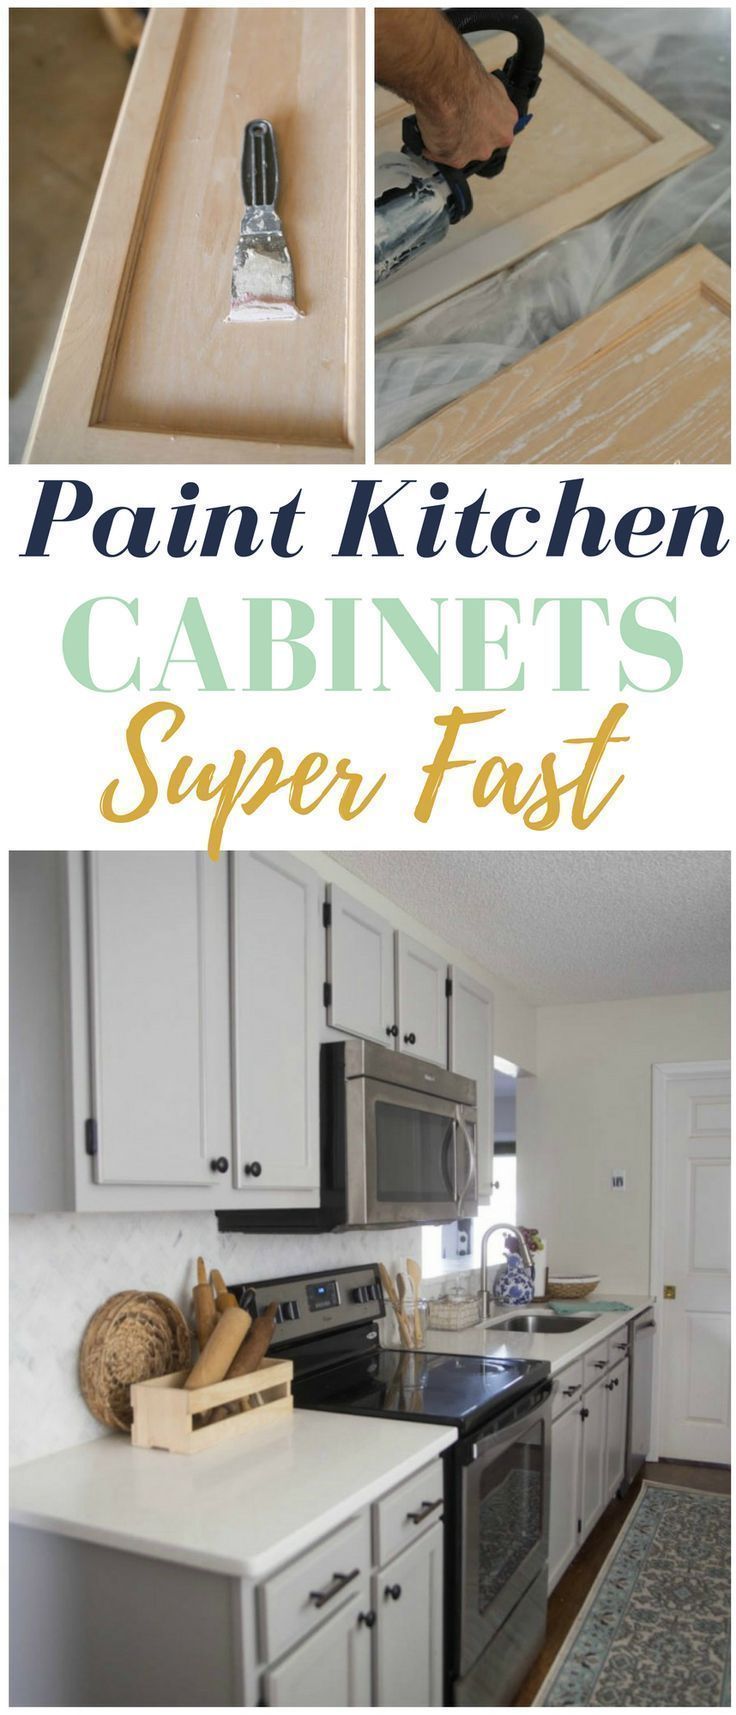 How to Paint Kitchen Cabinets Super Fast - Some serious time saving tricks here!